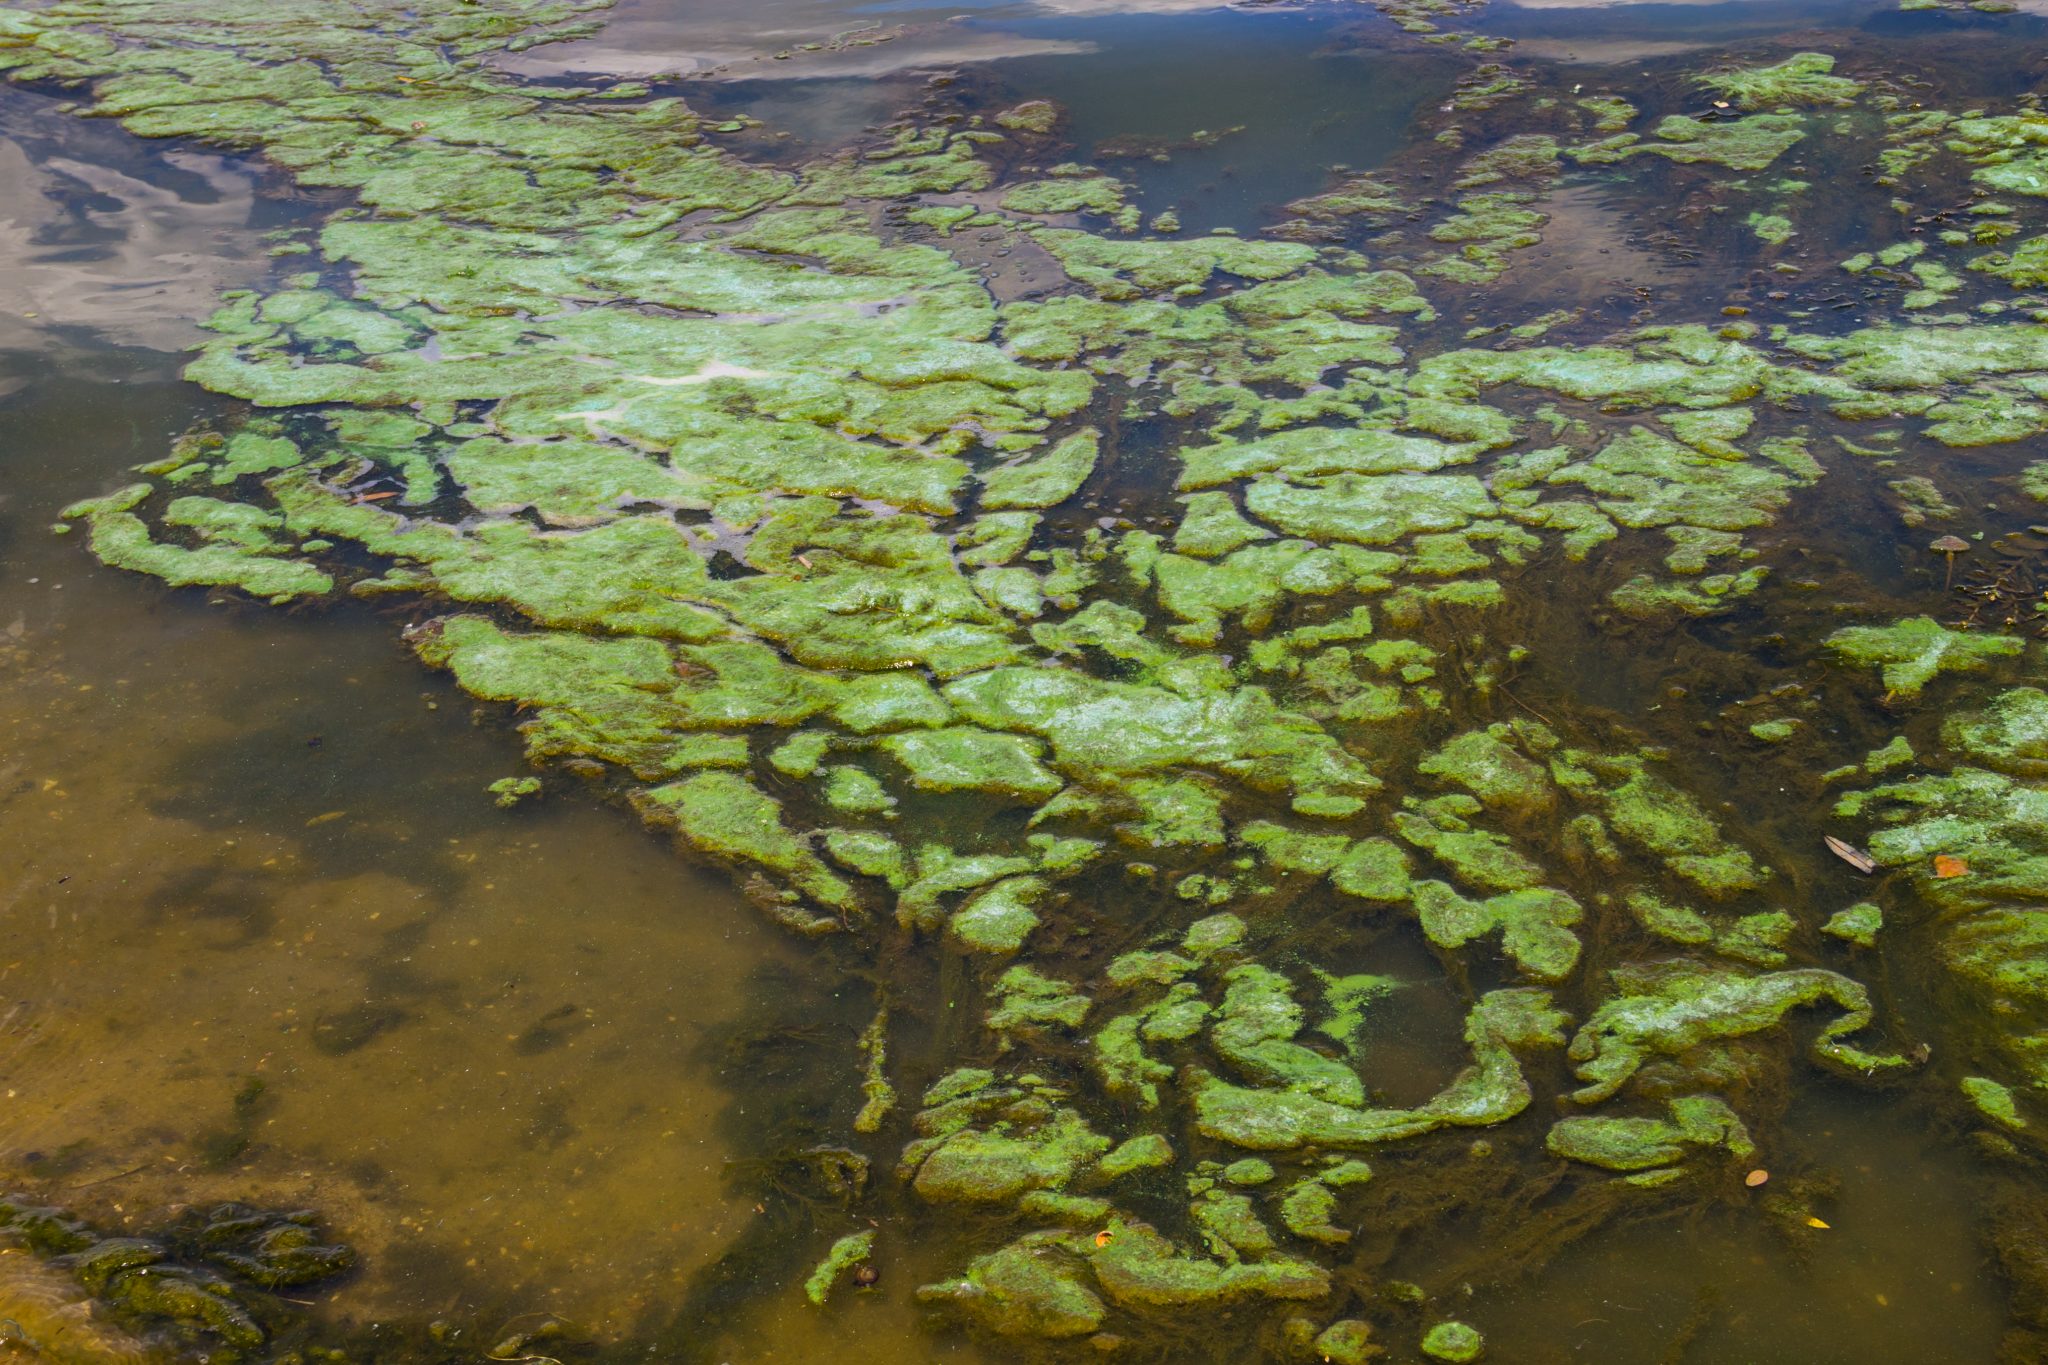 Green algae in the water surface